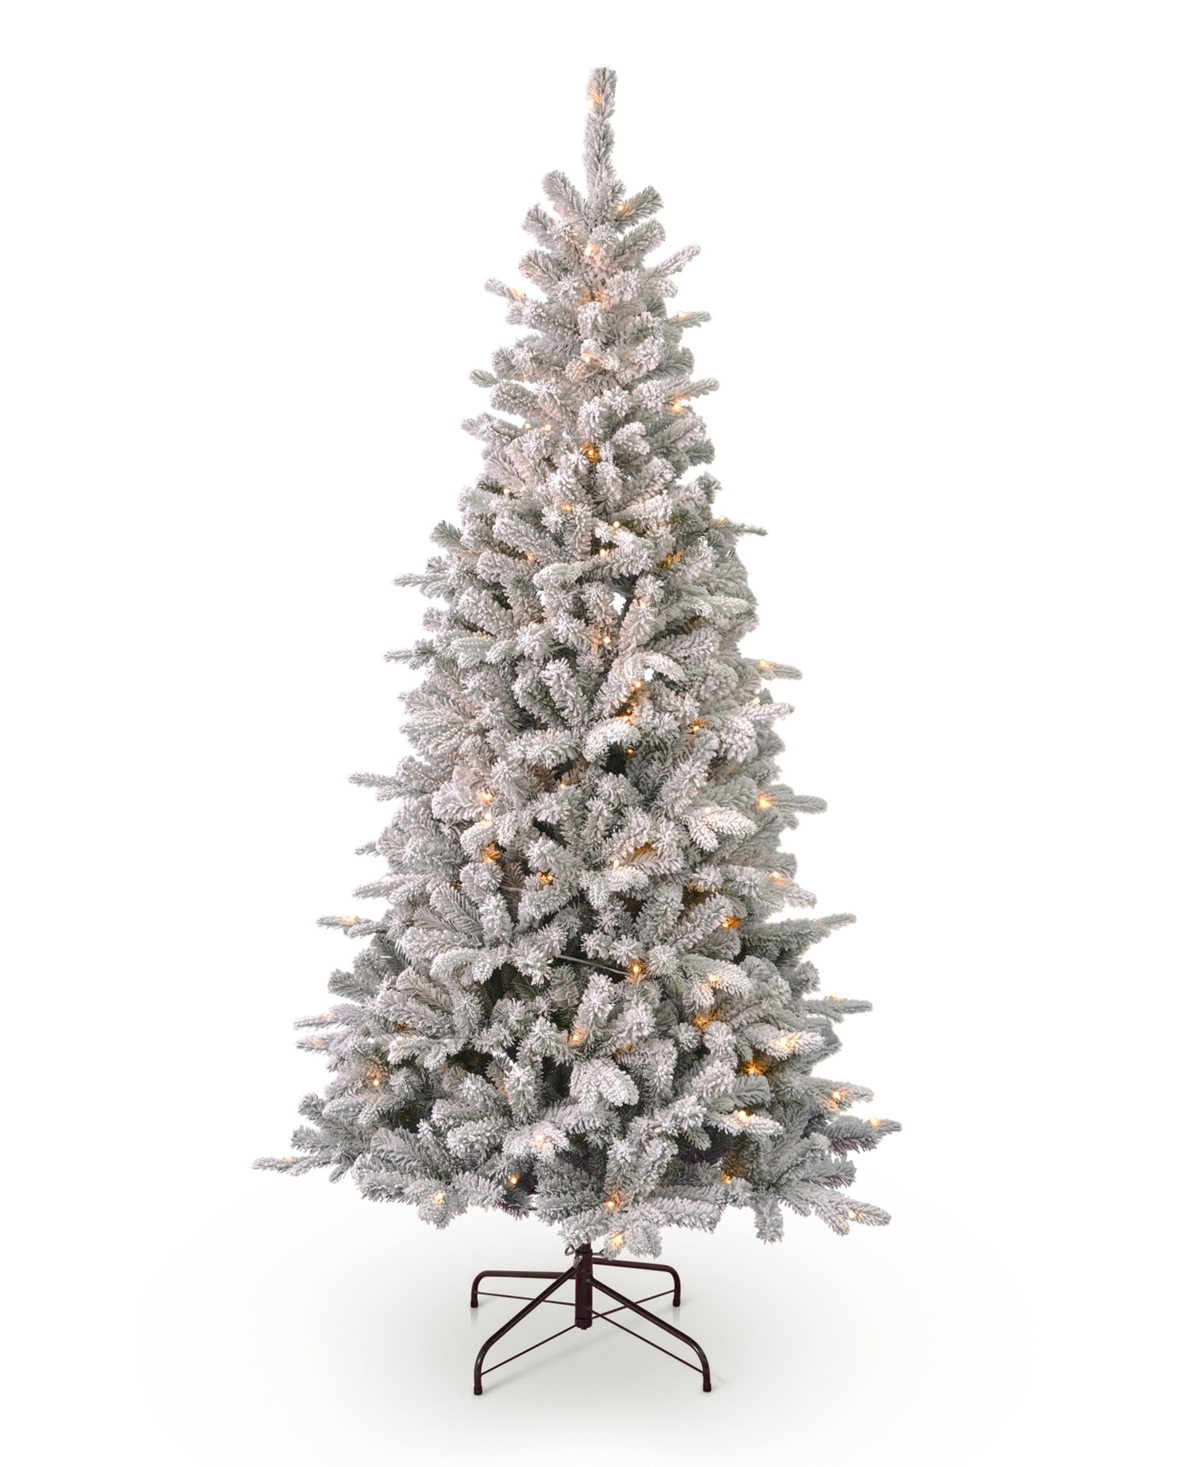 Seasonal Estes Pine Flocked Pre-lit 7' Pe, Pvc Tree With Metal Stand, 1231 Tips, 200 Led Lights And Remote In White